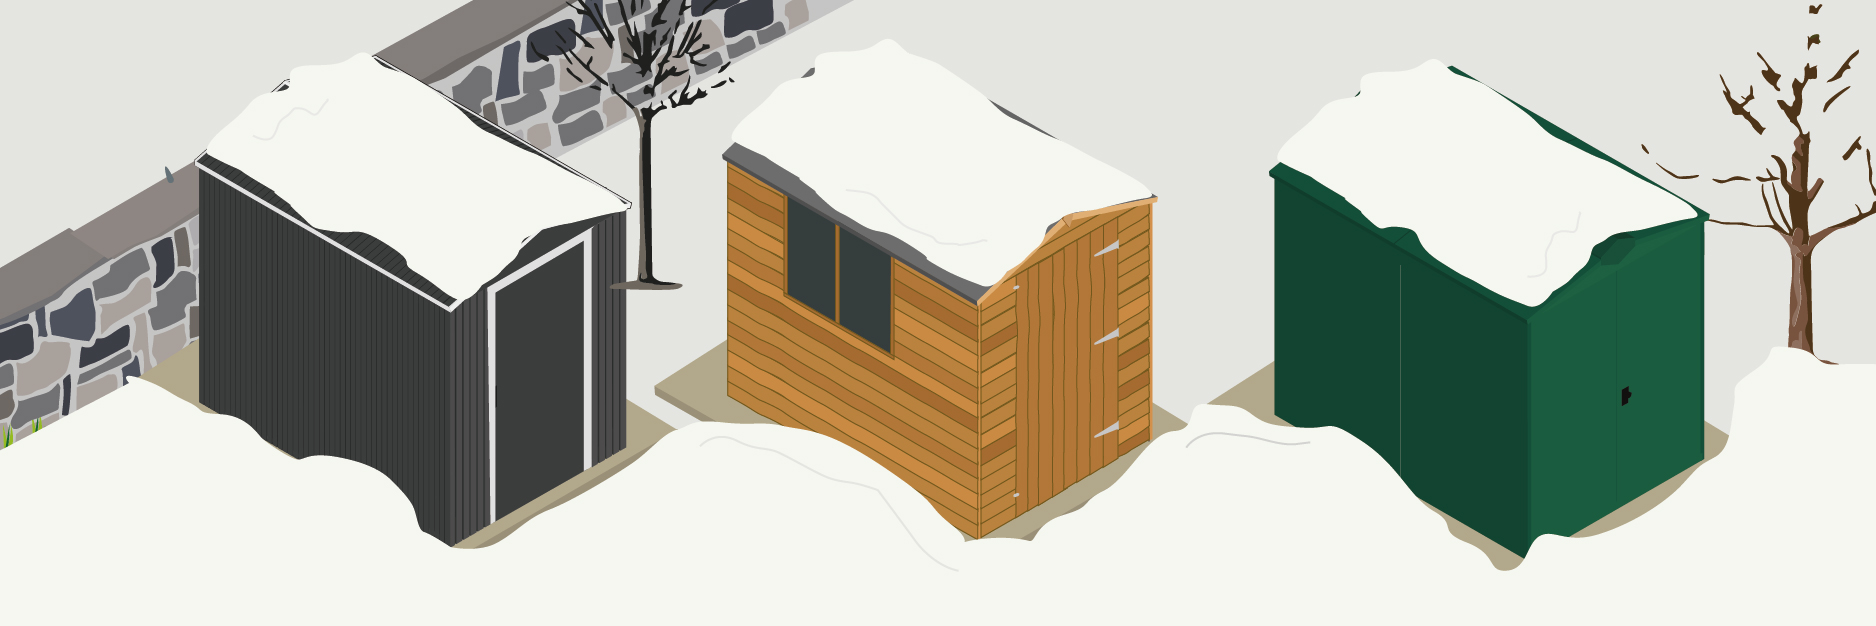 Snow Proof Asgard Sheds